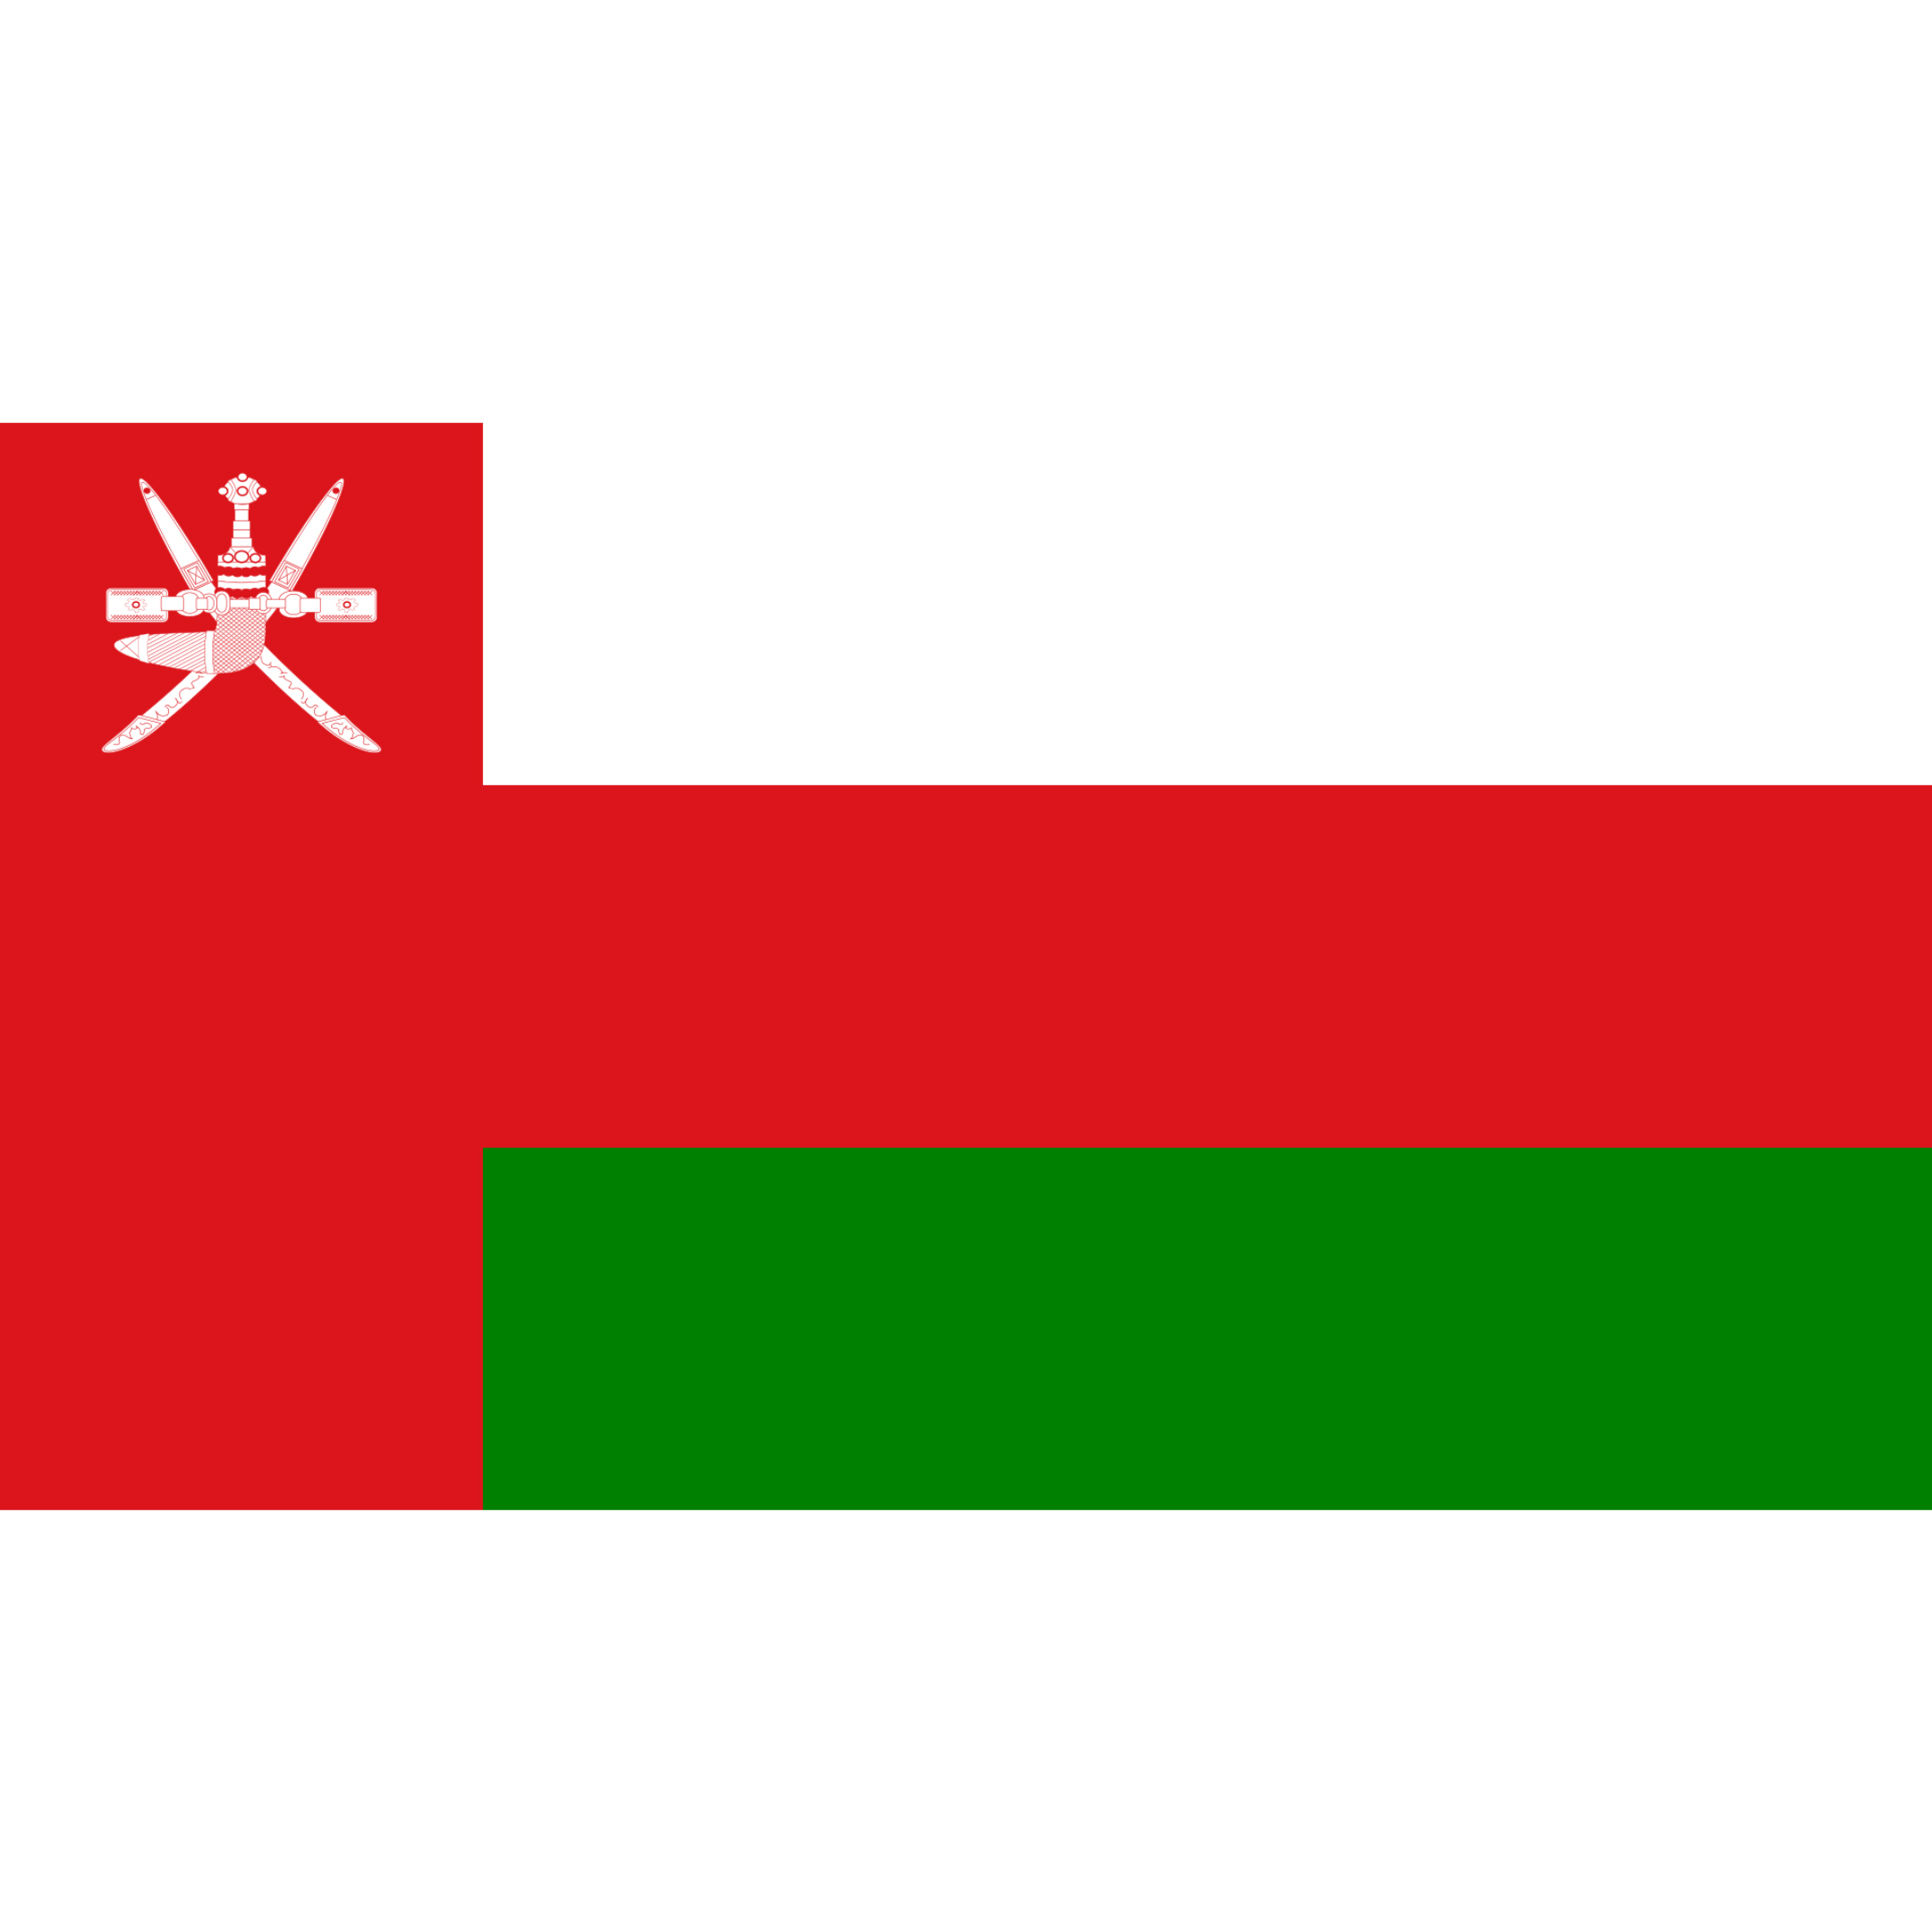 Oman's flag has three horizontal bands in white, green and red, and a red bar on the left containing a dagger and two swords.